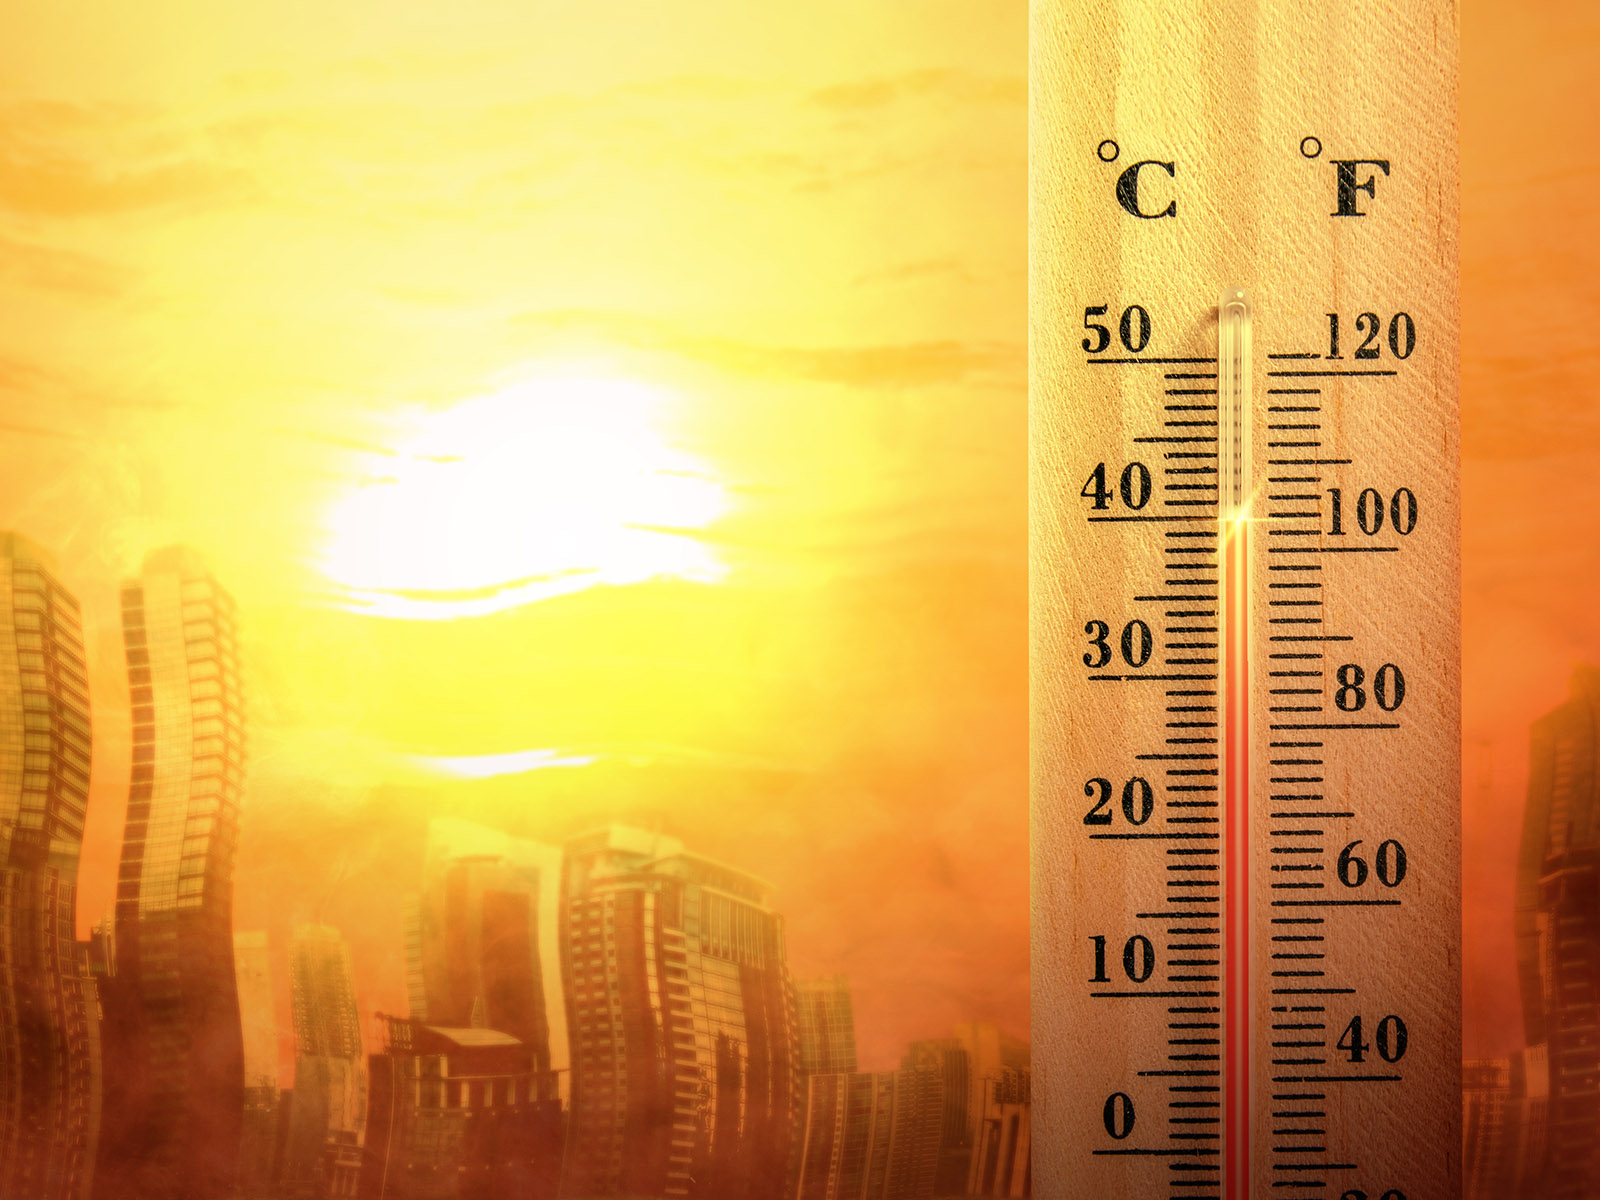 Image shows a thermometer and very warm buildings, to illustrate rising temperatures.